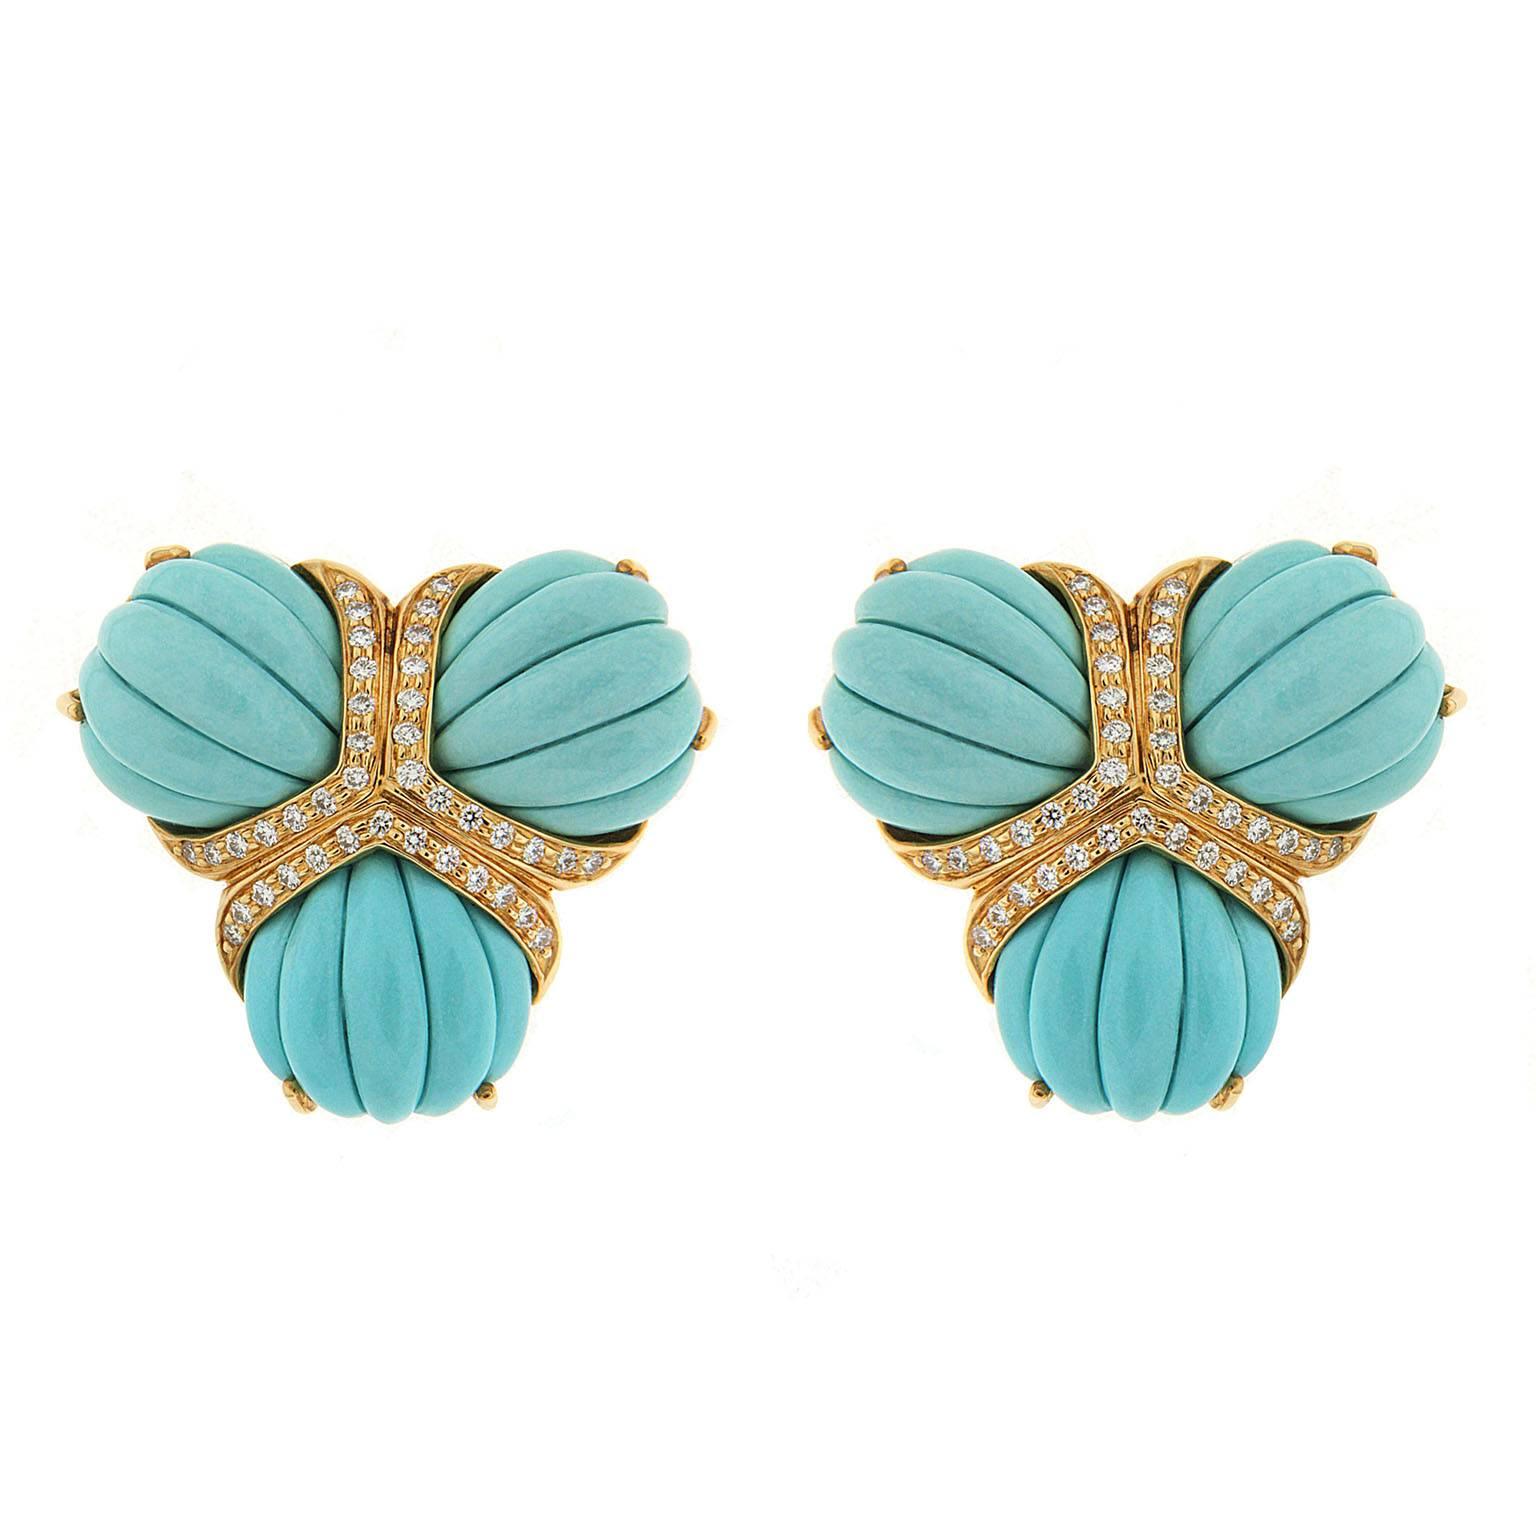 Valentin Magro Turquoise and Diamonds Fan Earrings